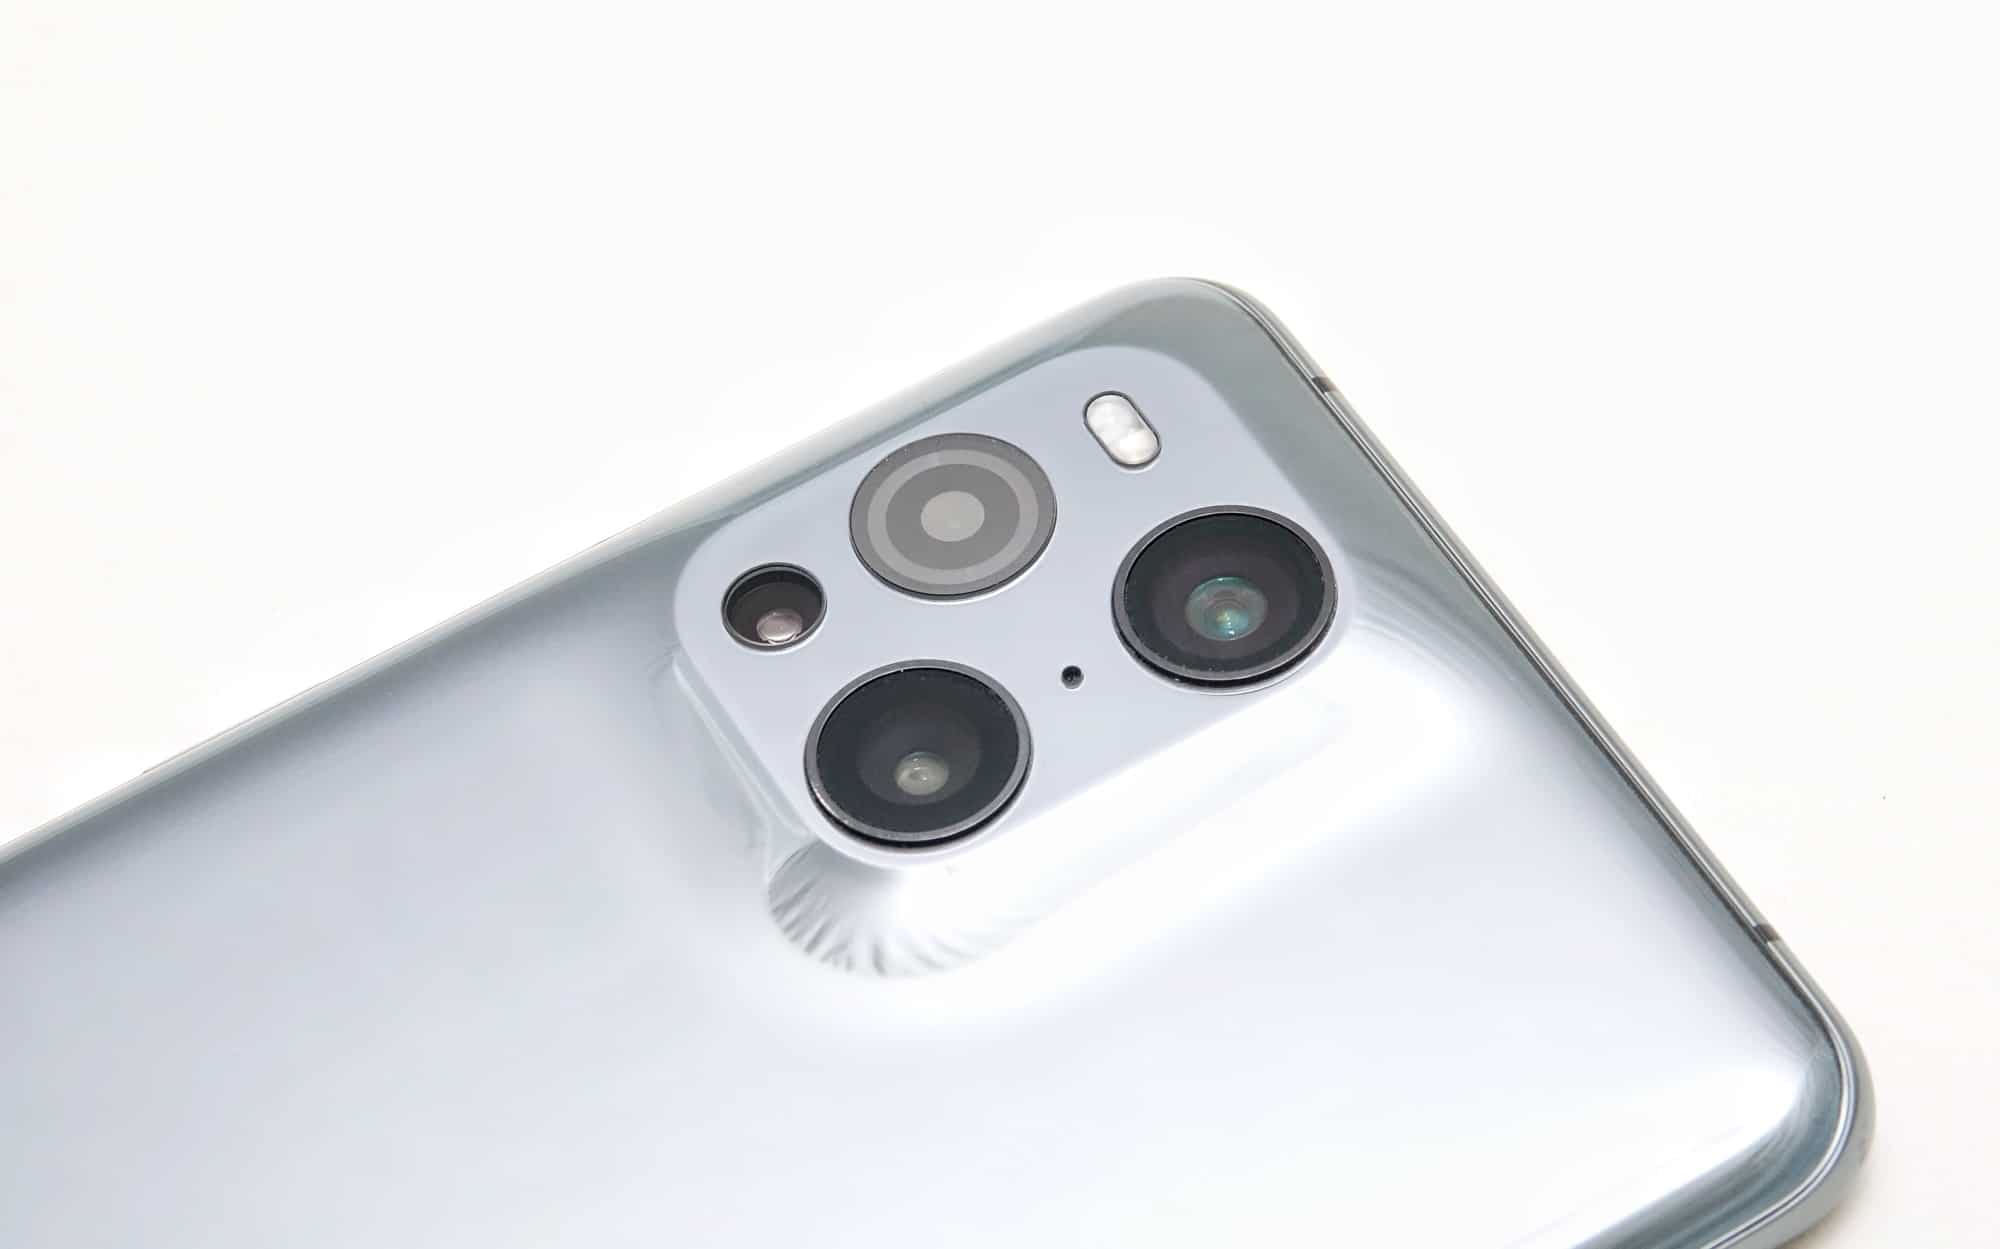 The rear camera system and sleek hump on the Find X3 Pro